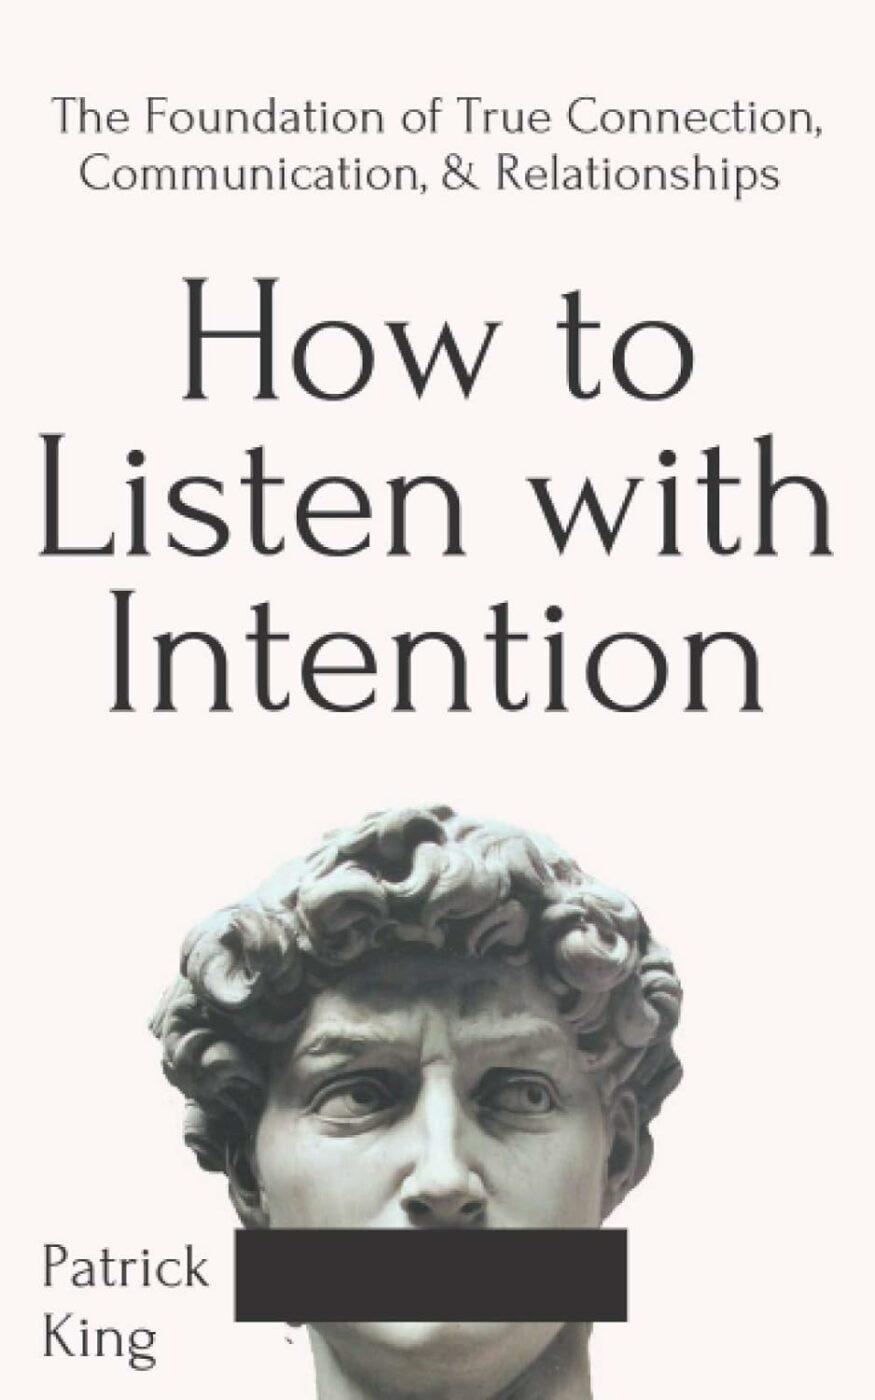 How to Listen with Intention by Patrick King is among the top communication skills books to read